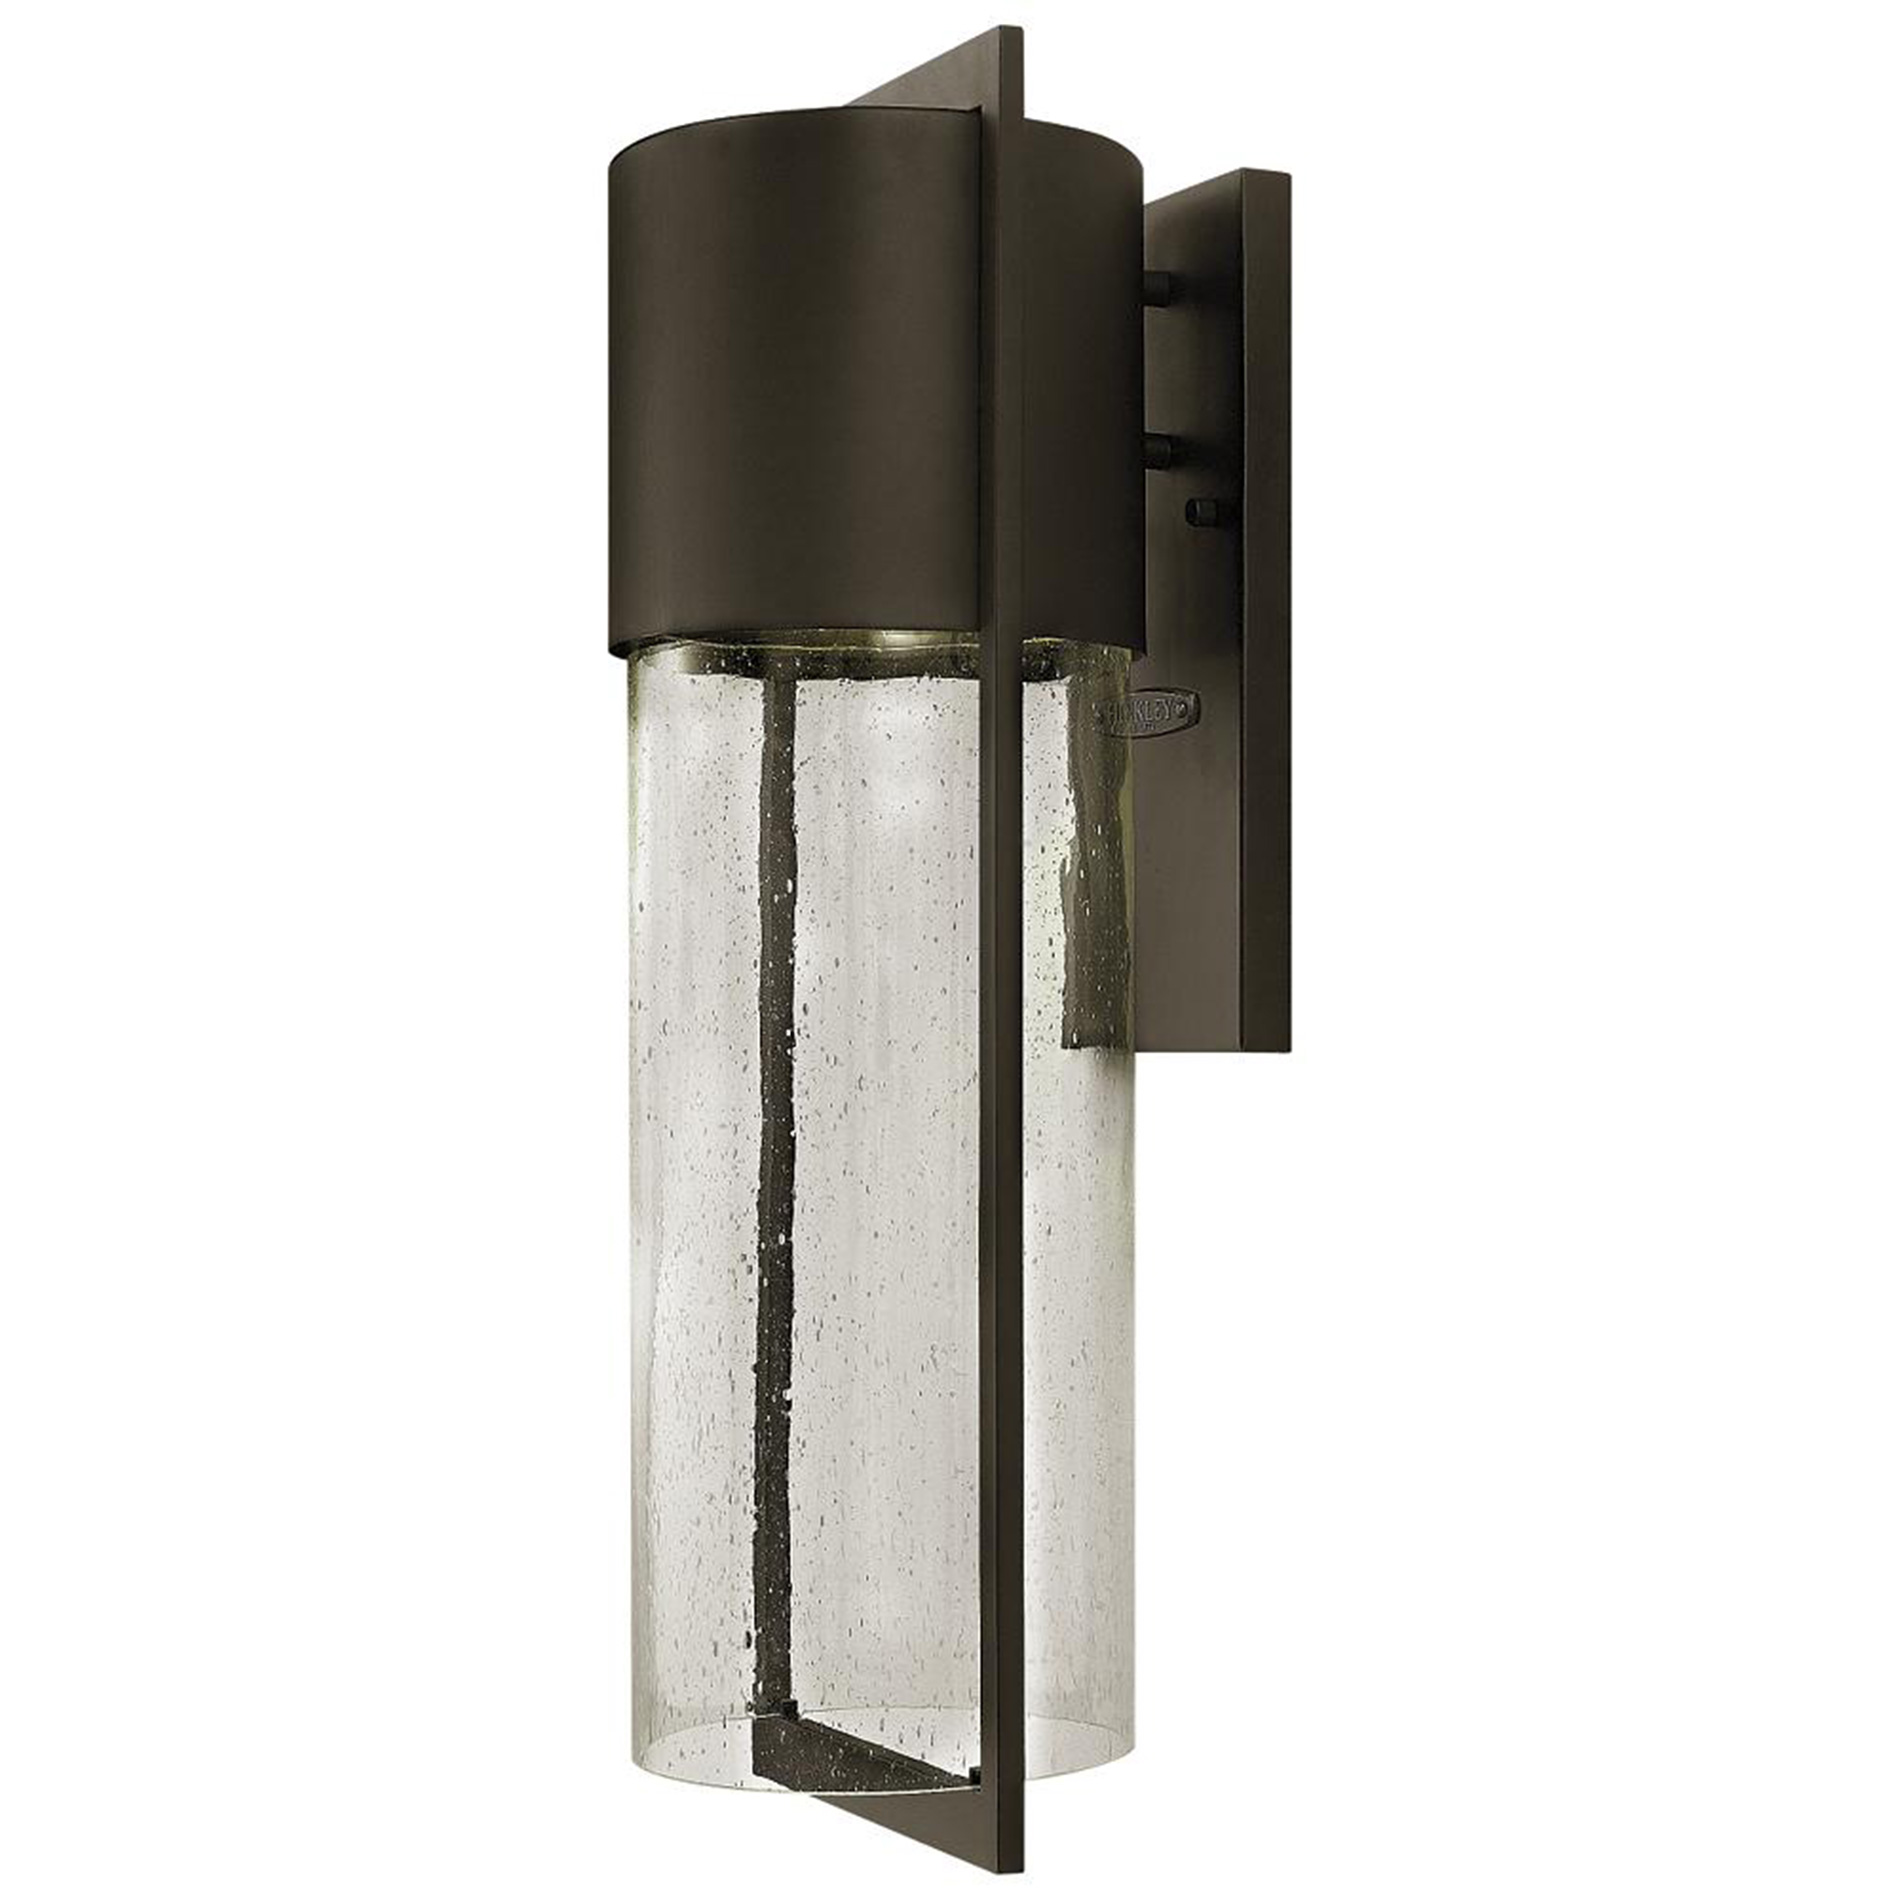 Shelter Outdoor Wall Sconce by Hinkley Lighting